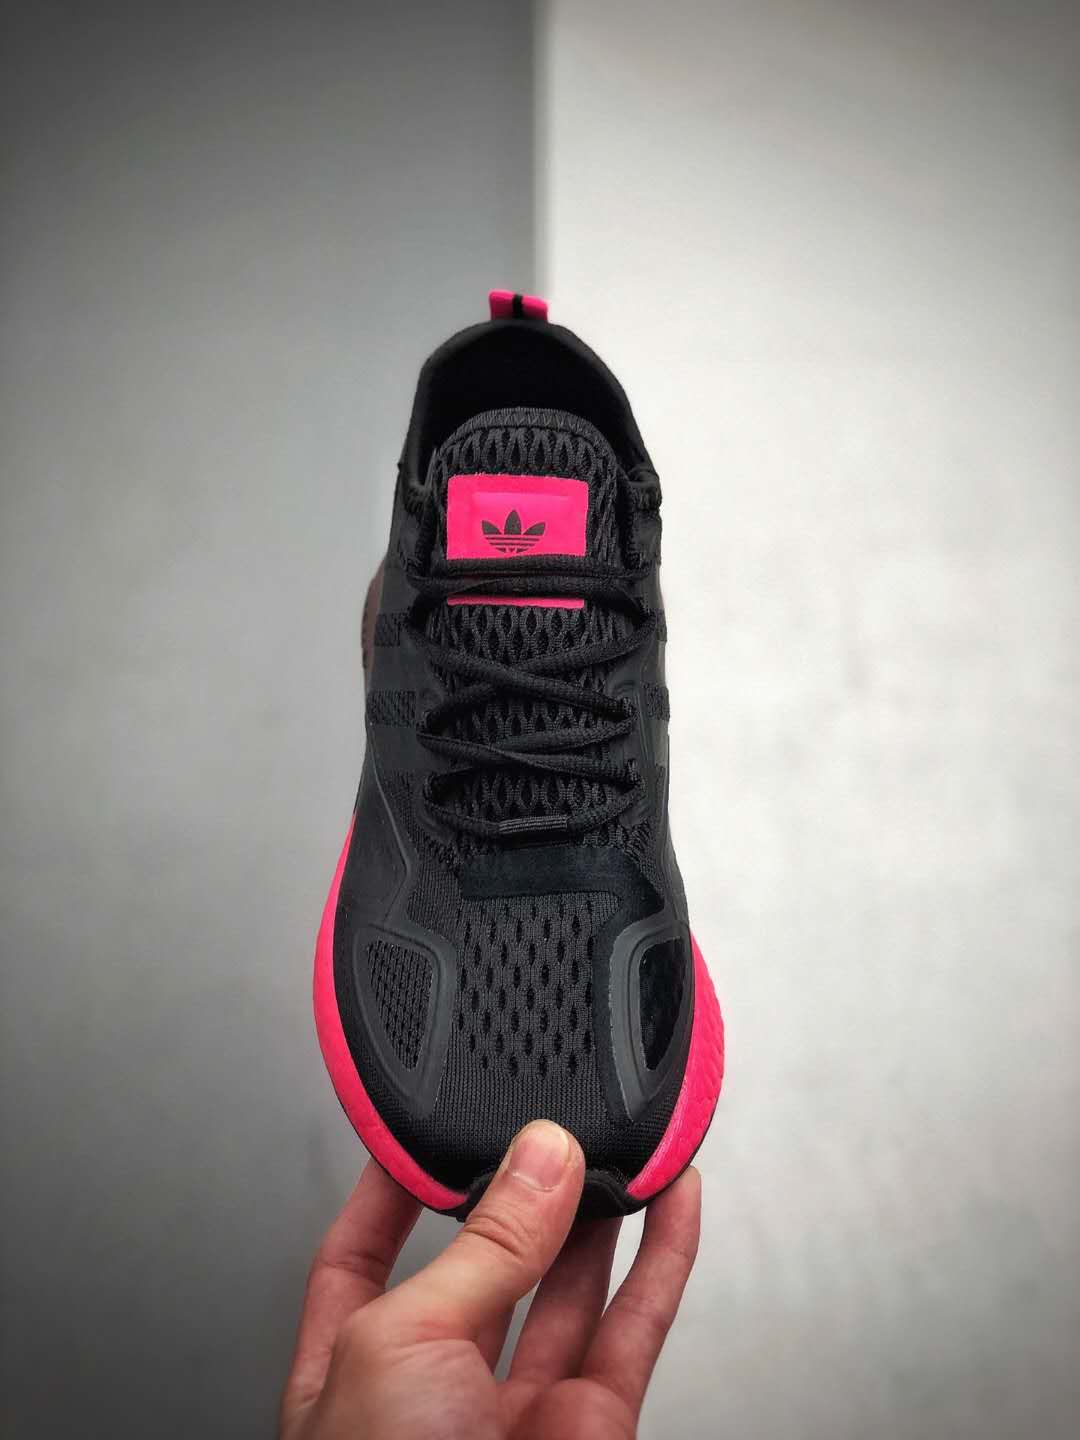 Adidas ZX 2K Boost Black Shock Pink FV8986 - Stylish and Comfortable Footwear